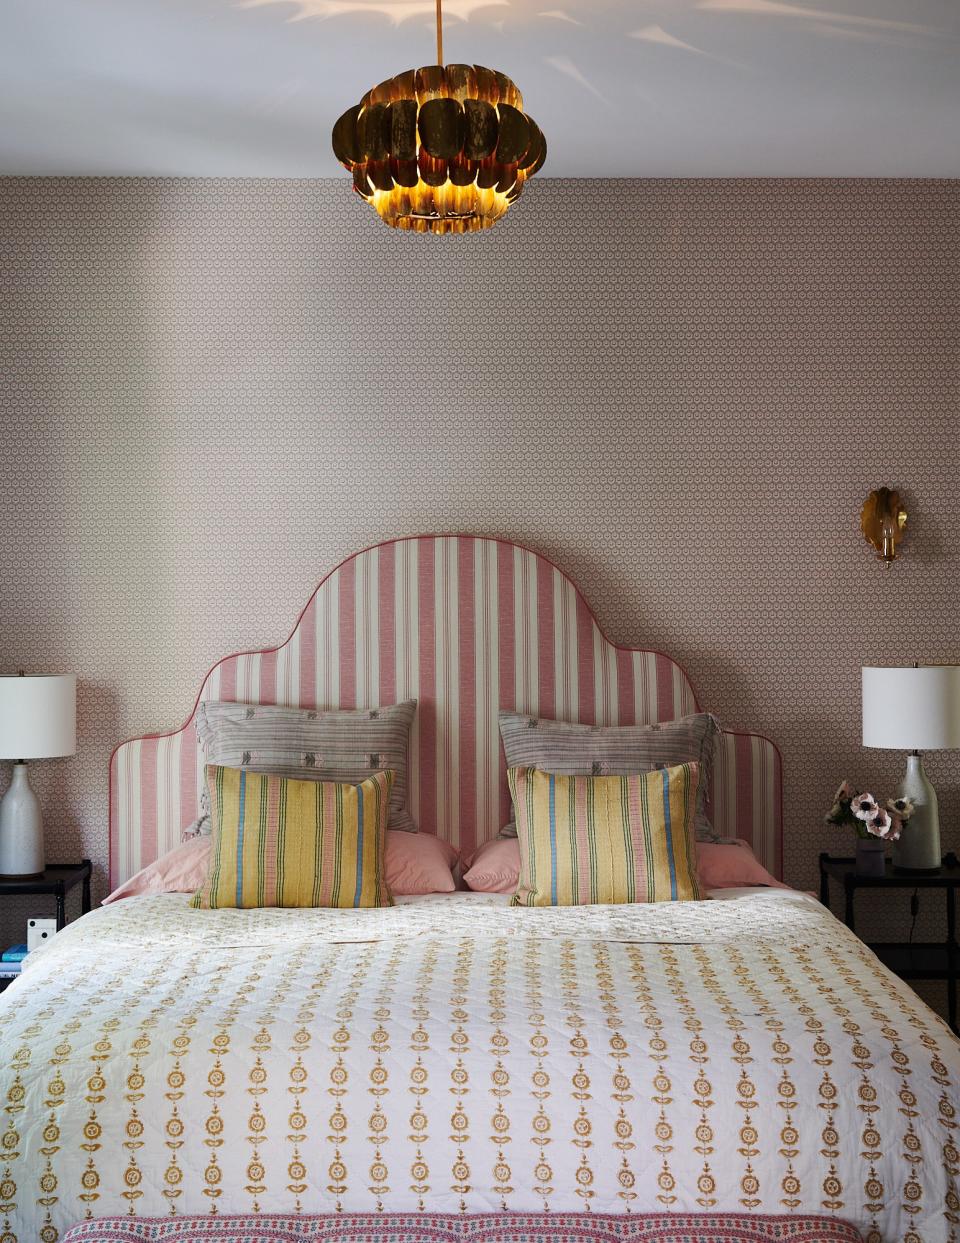 The guest bedroom is a study in prints. The wallpaper is from Lee Jofa and paired with a headboard from Claremont and bed linens from Les Indiennes. The bedside tables are vintage from Nickey Kehoe with lamps from Lawson Fenning.